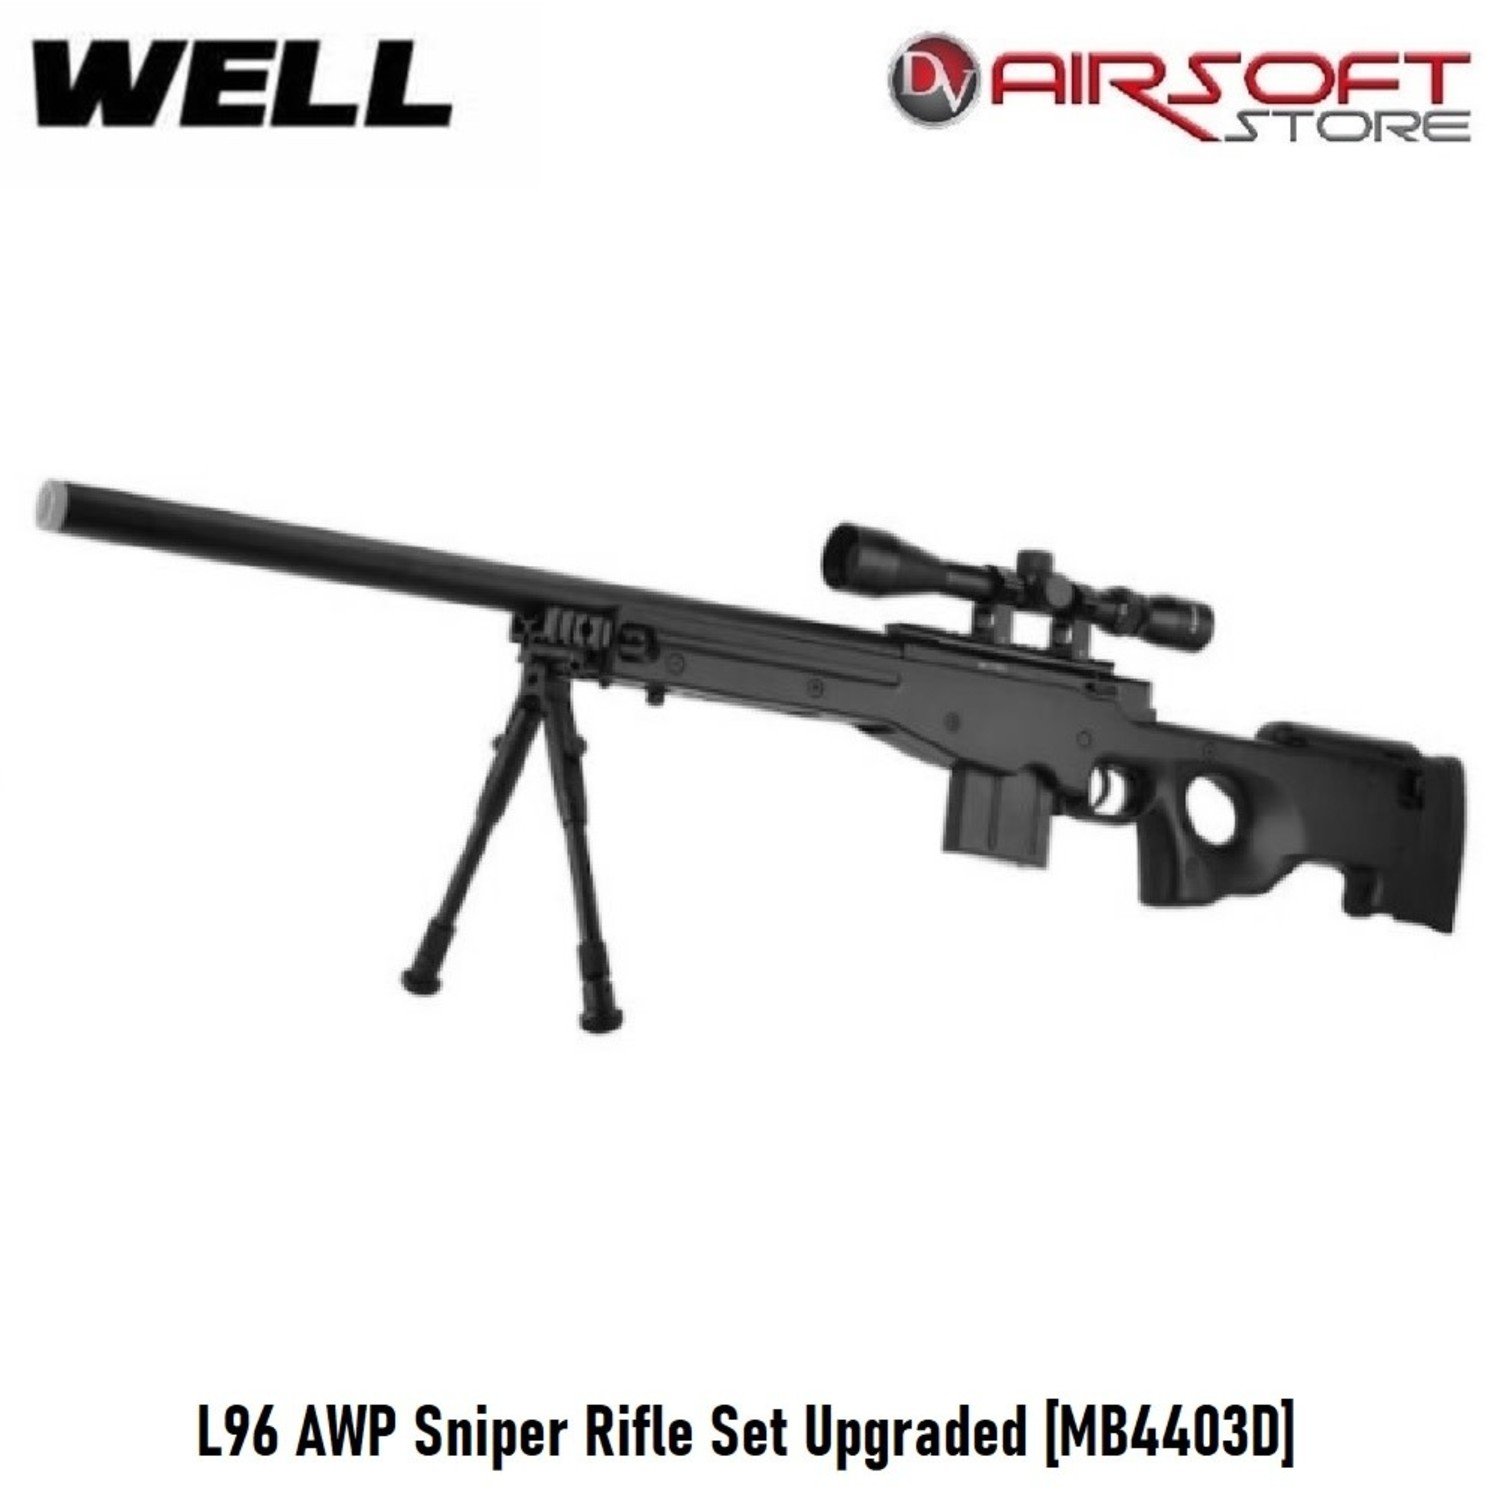 L96 AWP Sniper Rifle Set Upgraded [MB4401D] - Airsoft Store